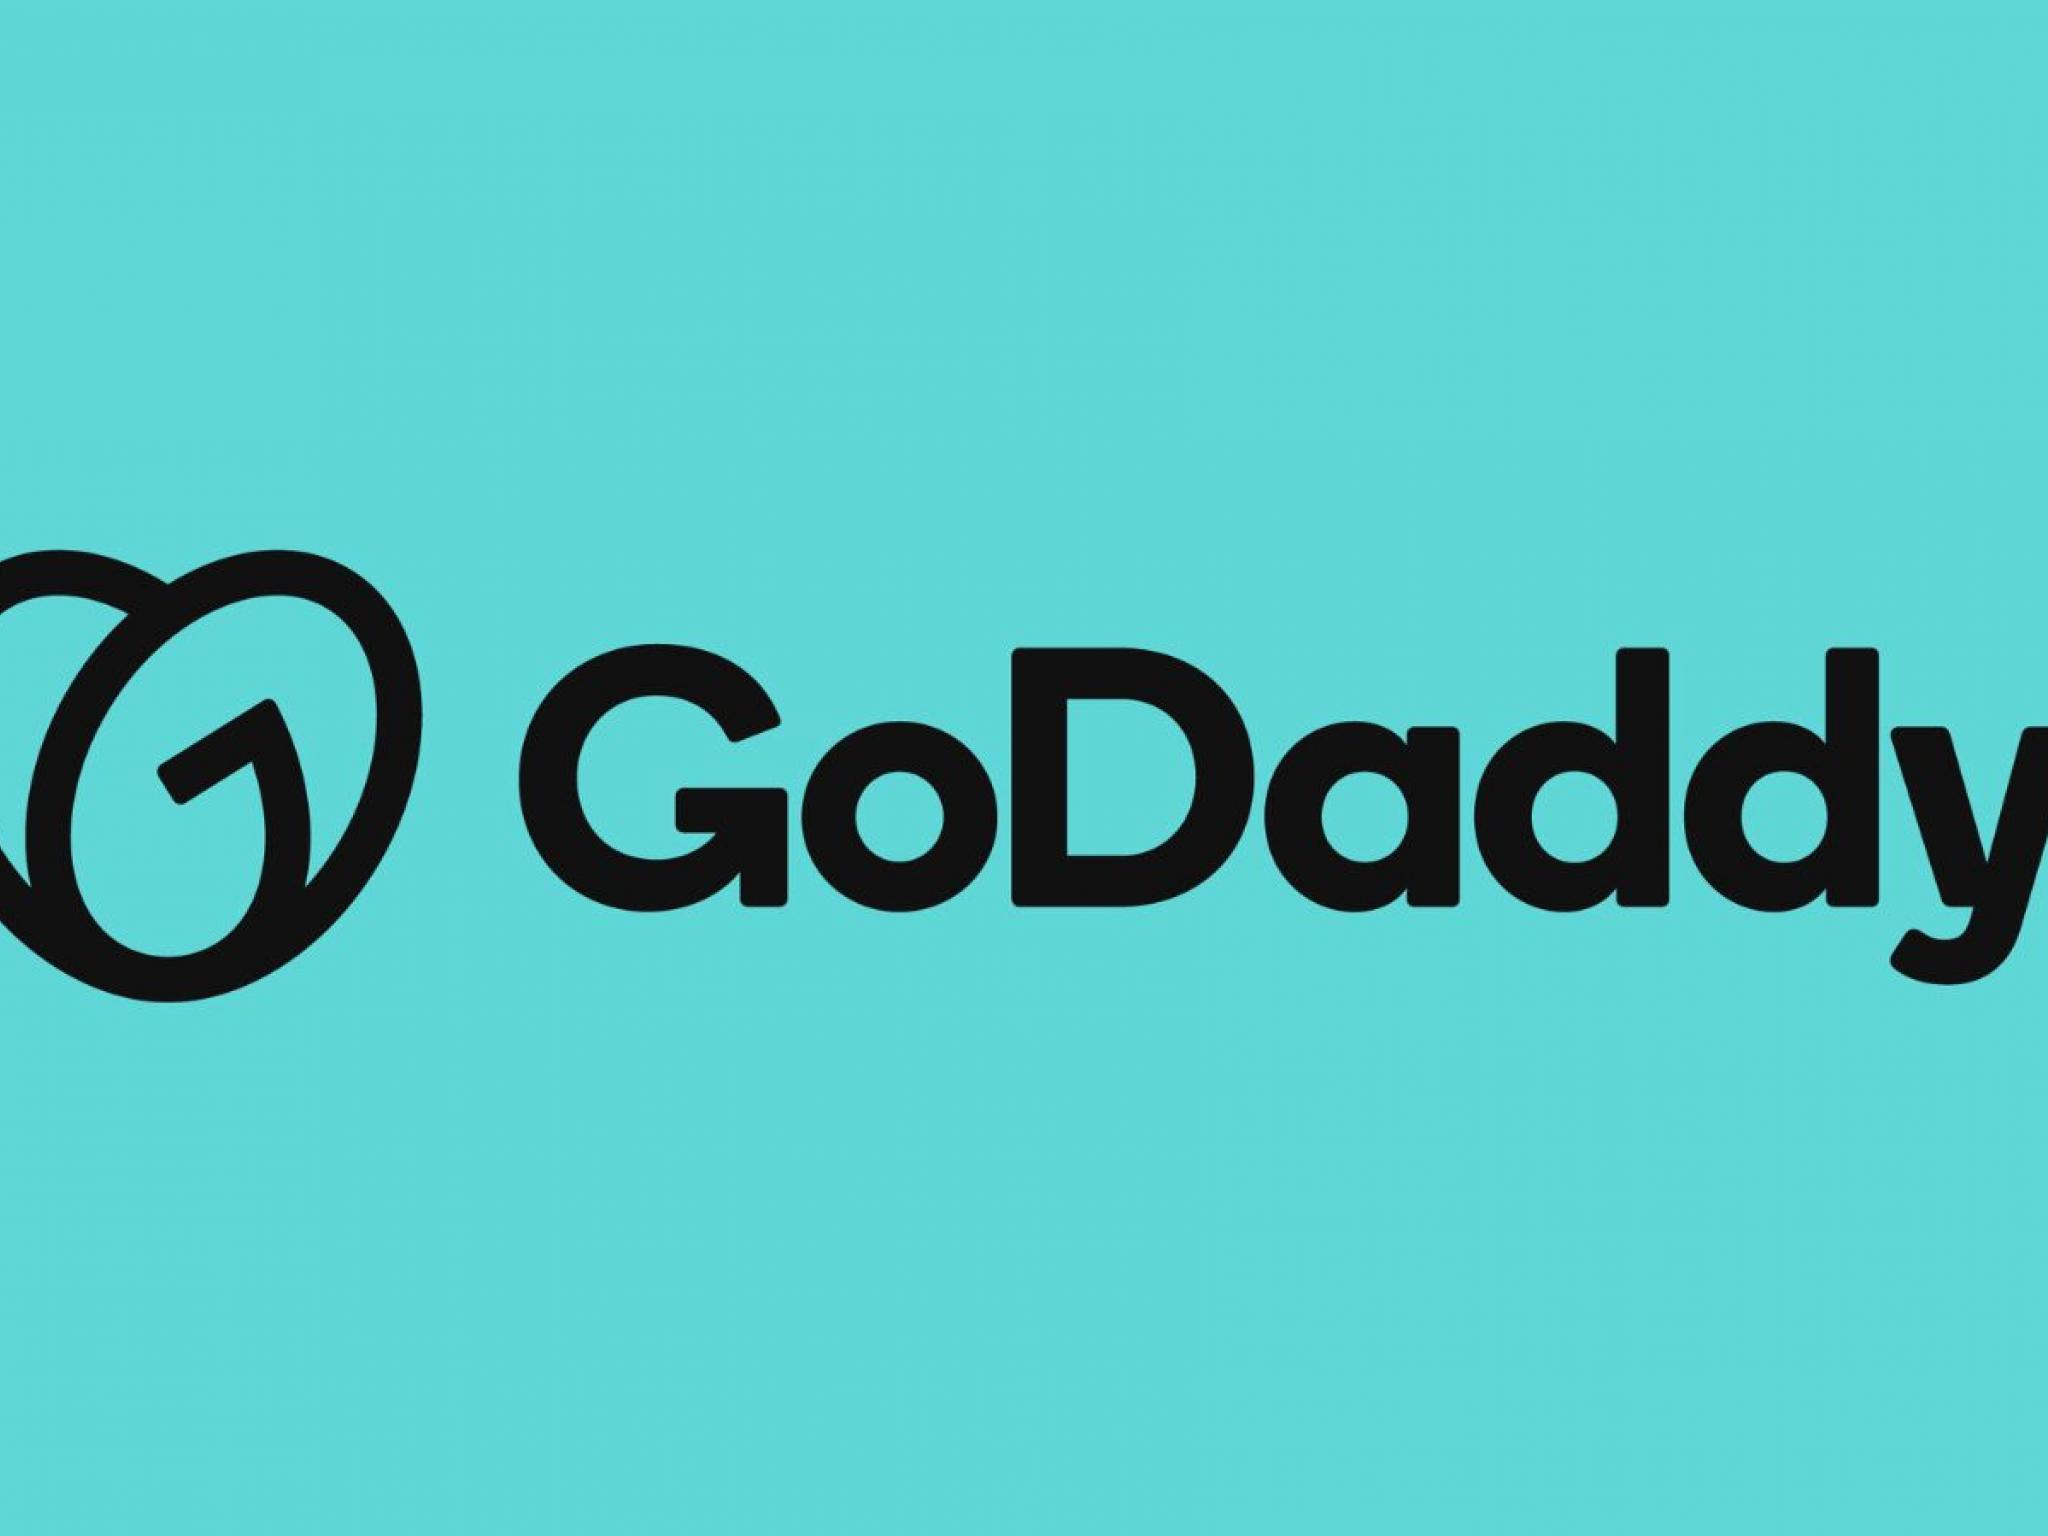  godaddy-to-rally-around-44-here-are-10-other-analyst-forecasts-for-wednesday 